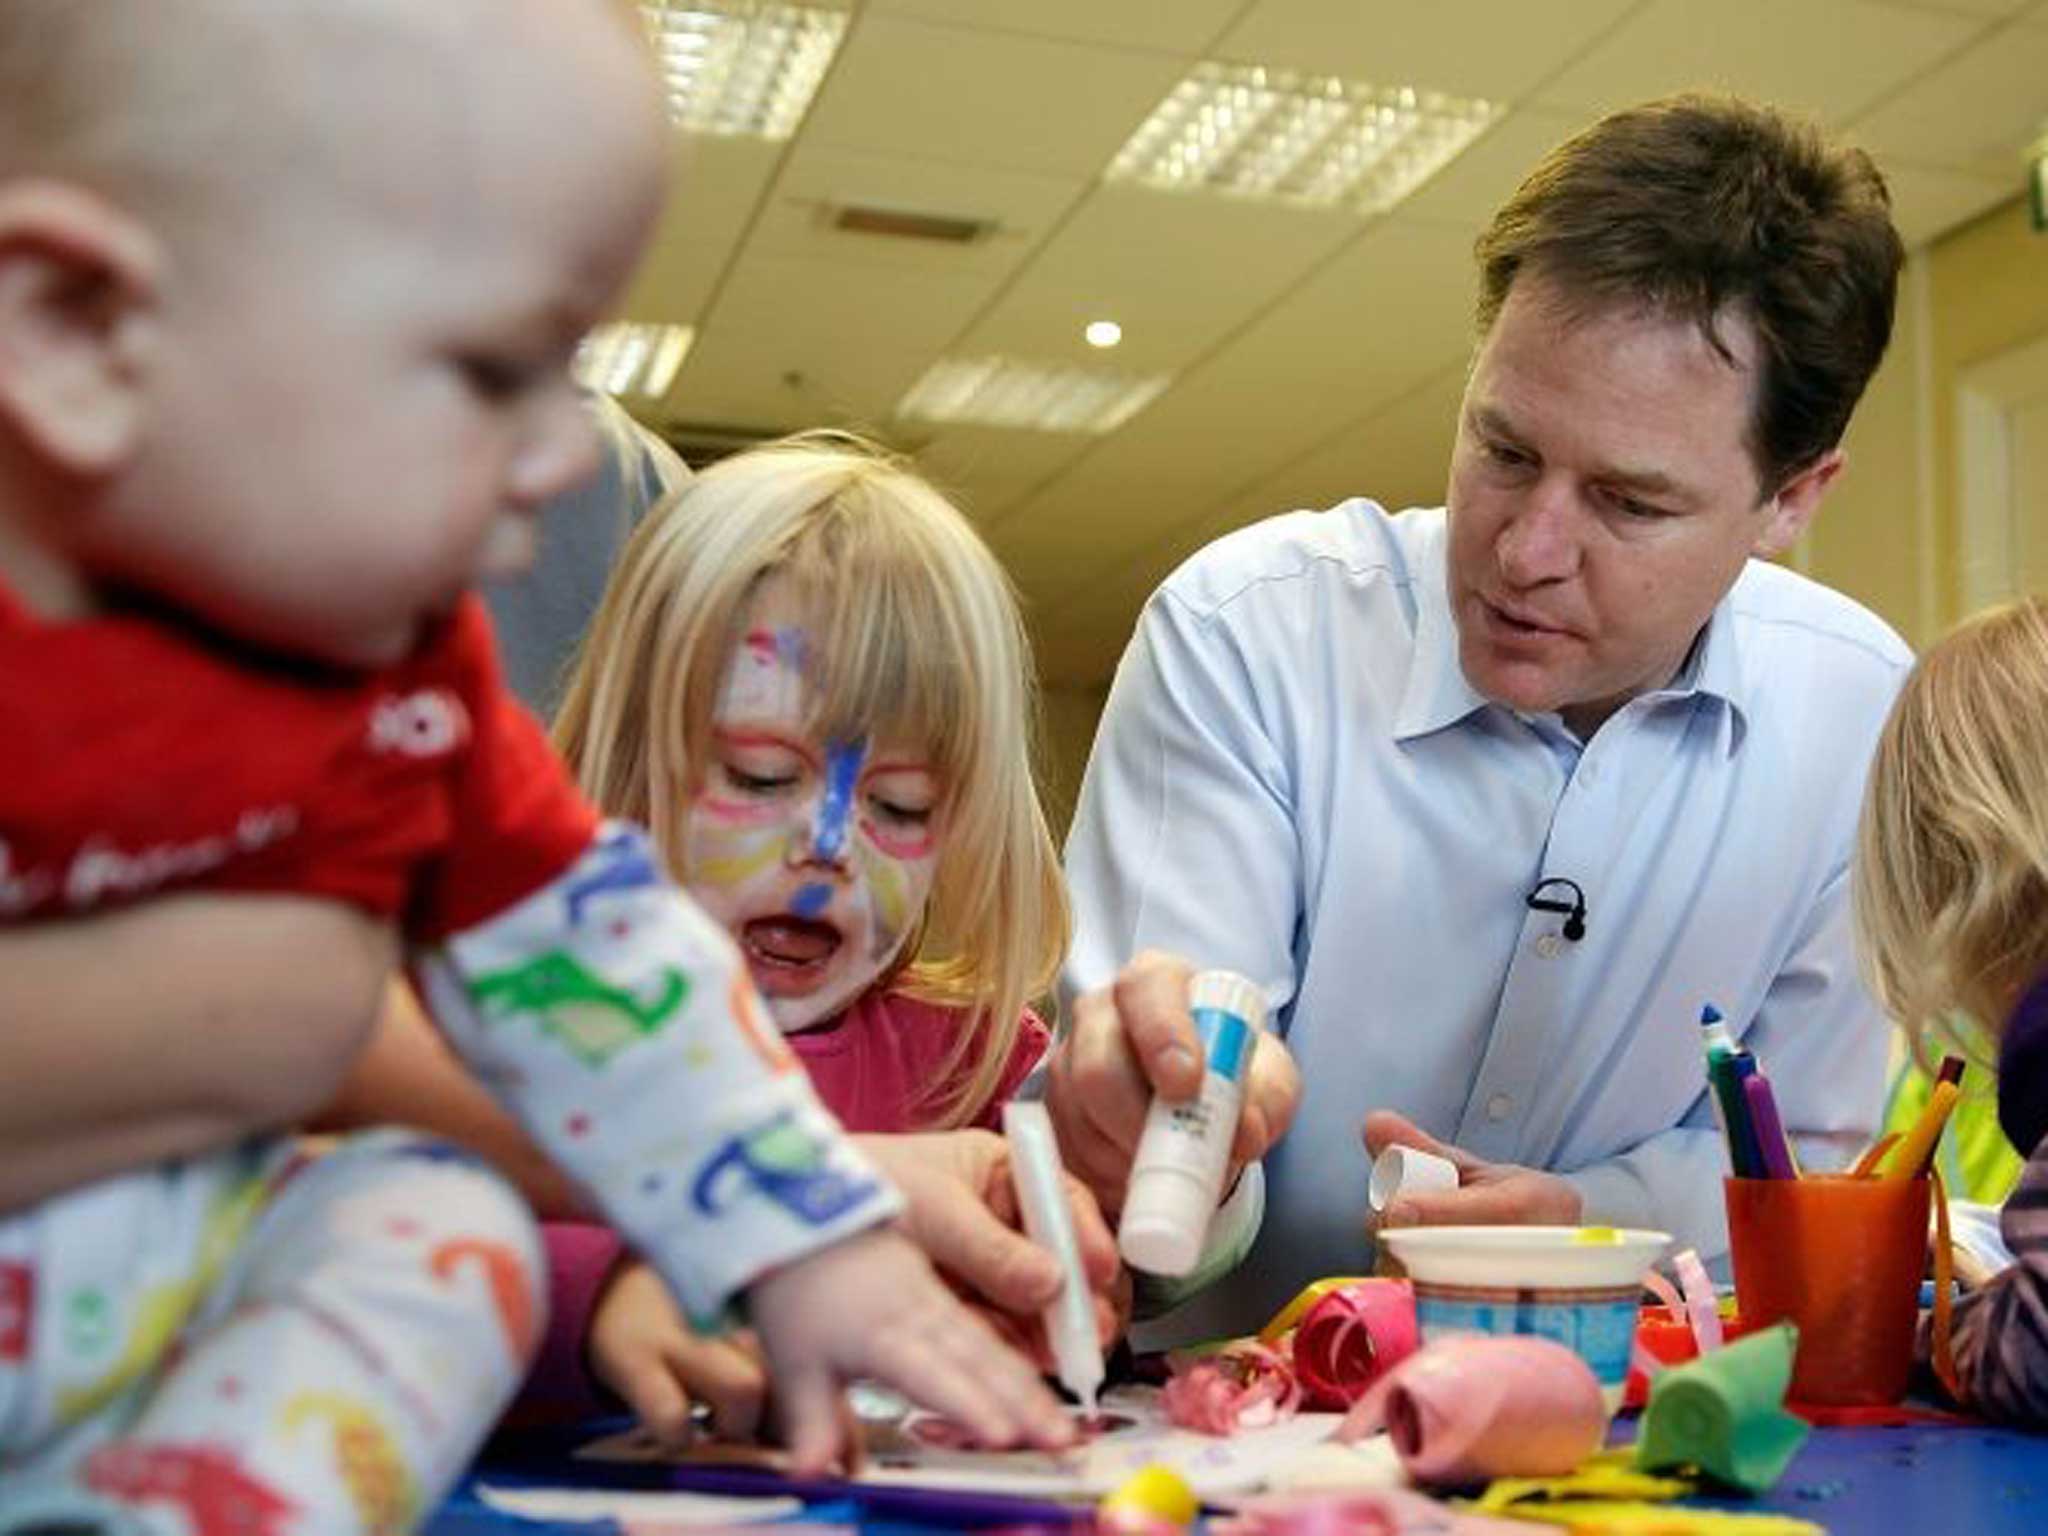 Nick Clegg: ‘This is about choice and fairness’